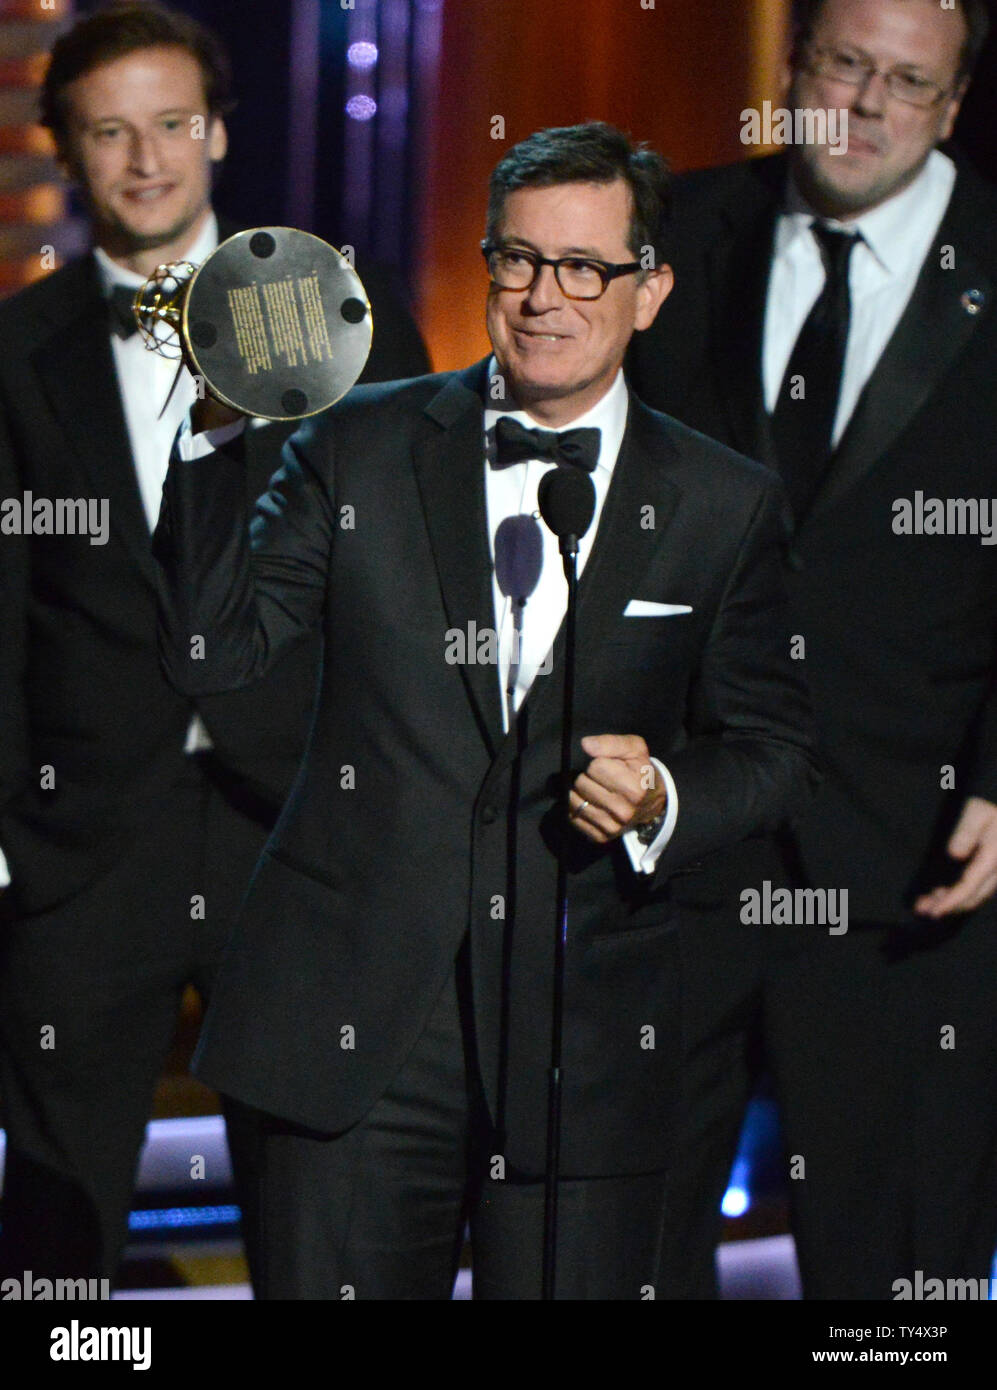 Stephen Colbert and the producers of  'The Colbert Report' accept the award for outstanding variety series  during the Primetime Emmy Awards at the Nokia Theatre in Los Angeles on August 25, 2014.     UPI/Pat Benic Stock Photo